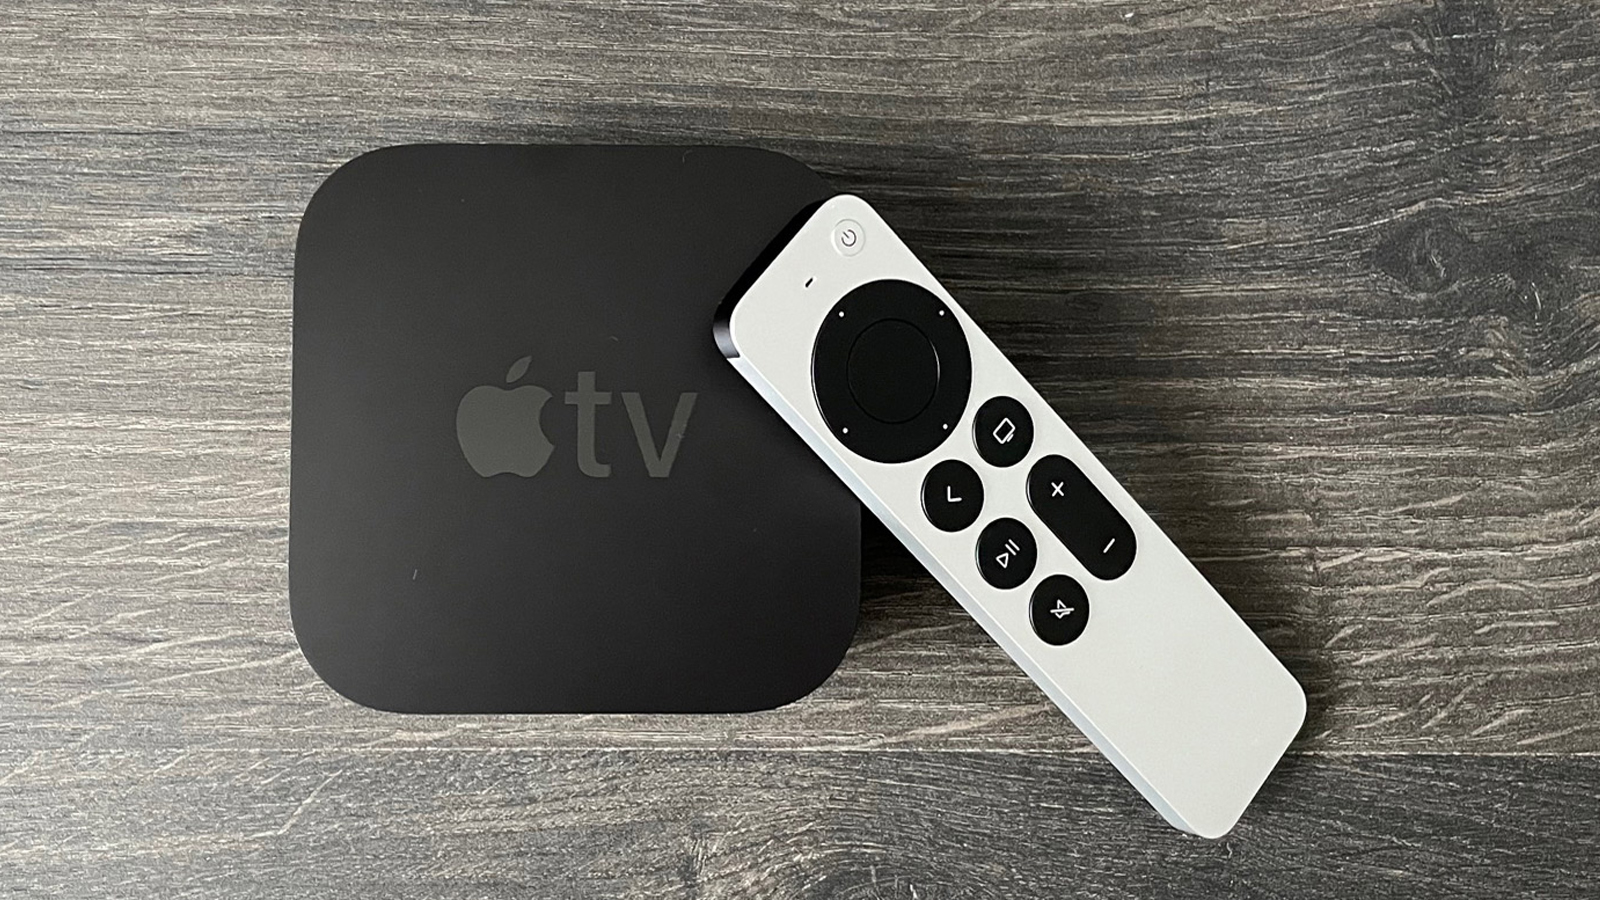 A cheaper Apple TV is rumored to be launching later this year